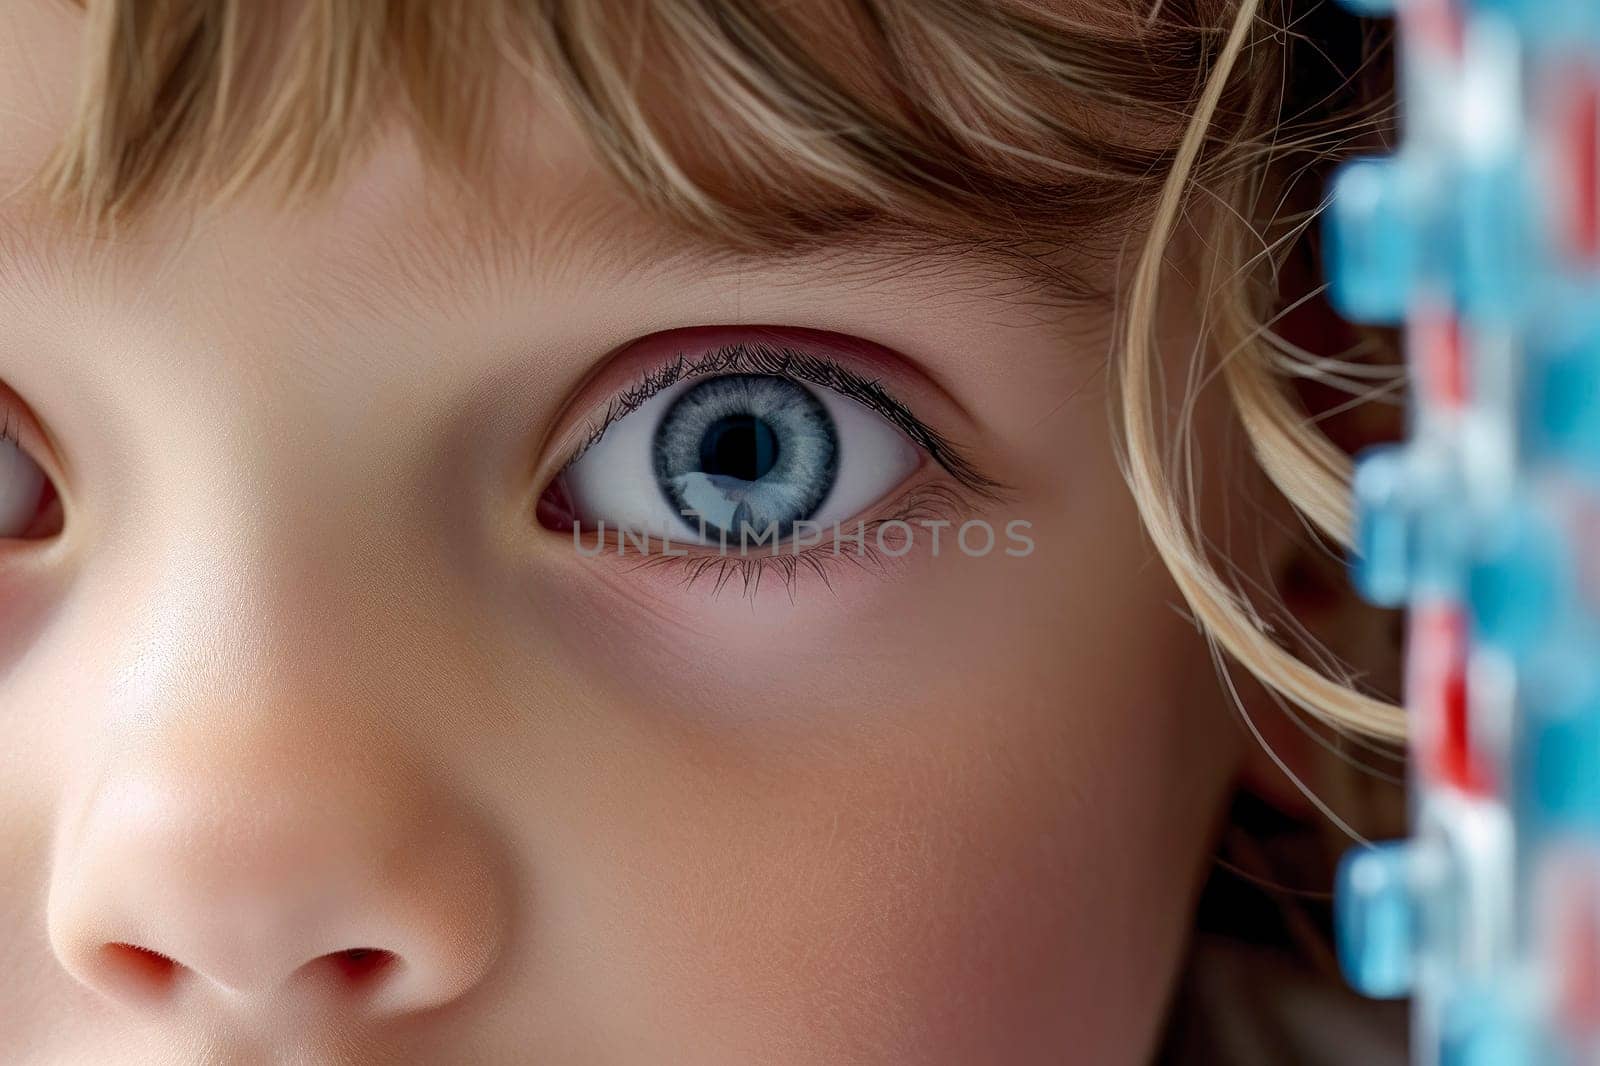 A close-up shot of a mesmerizing blue-eyed girl, radiating innocence and curiosity.